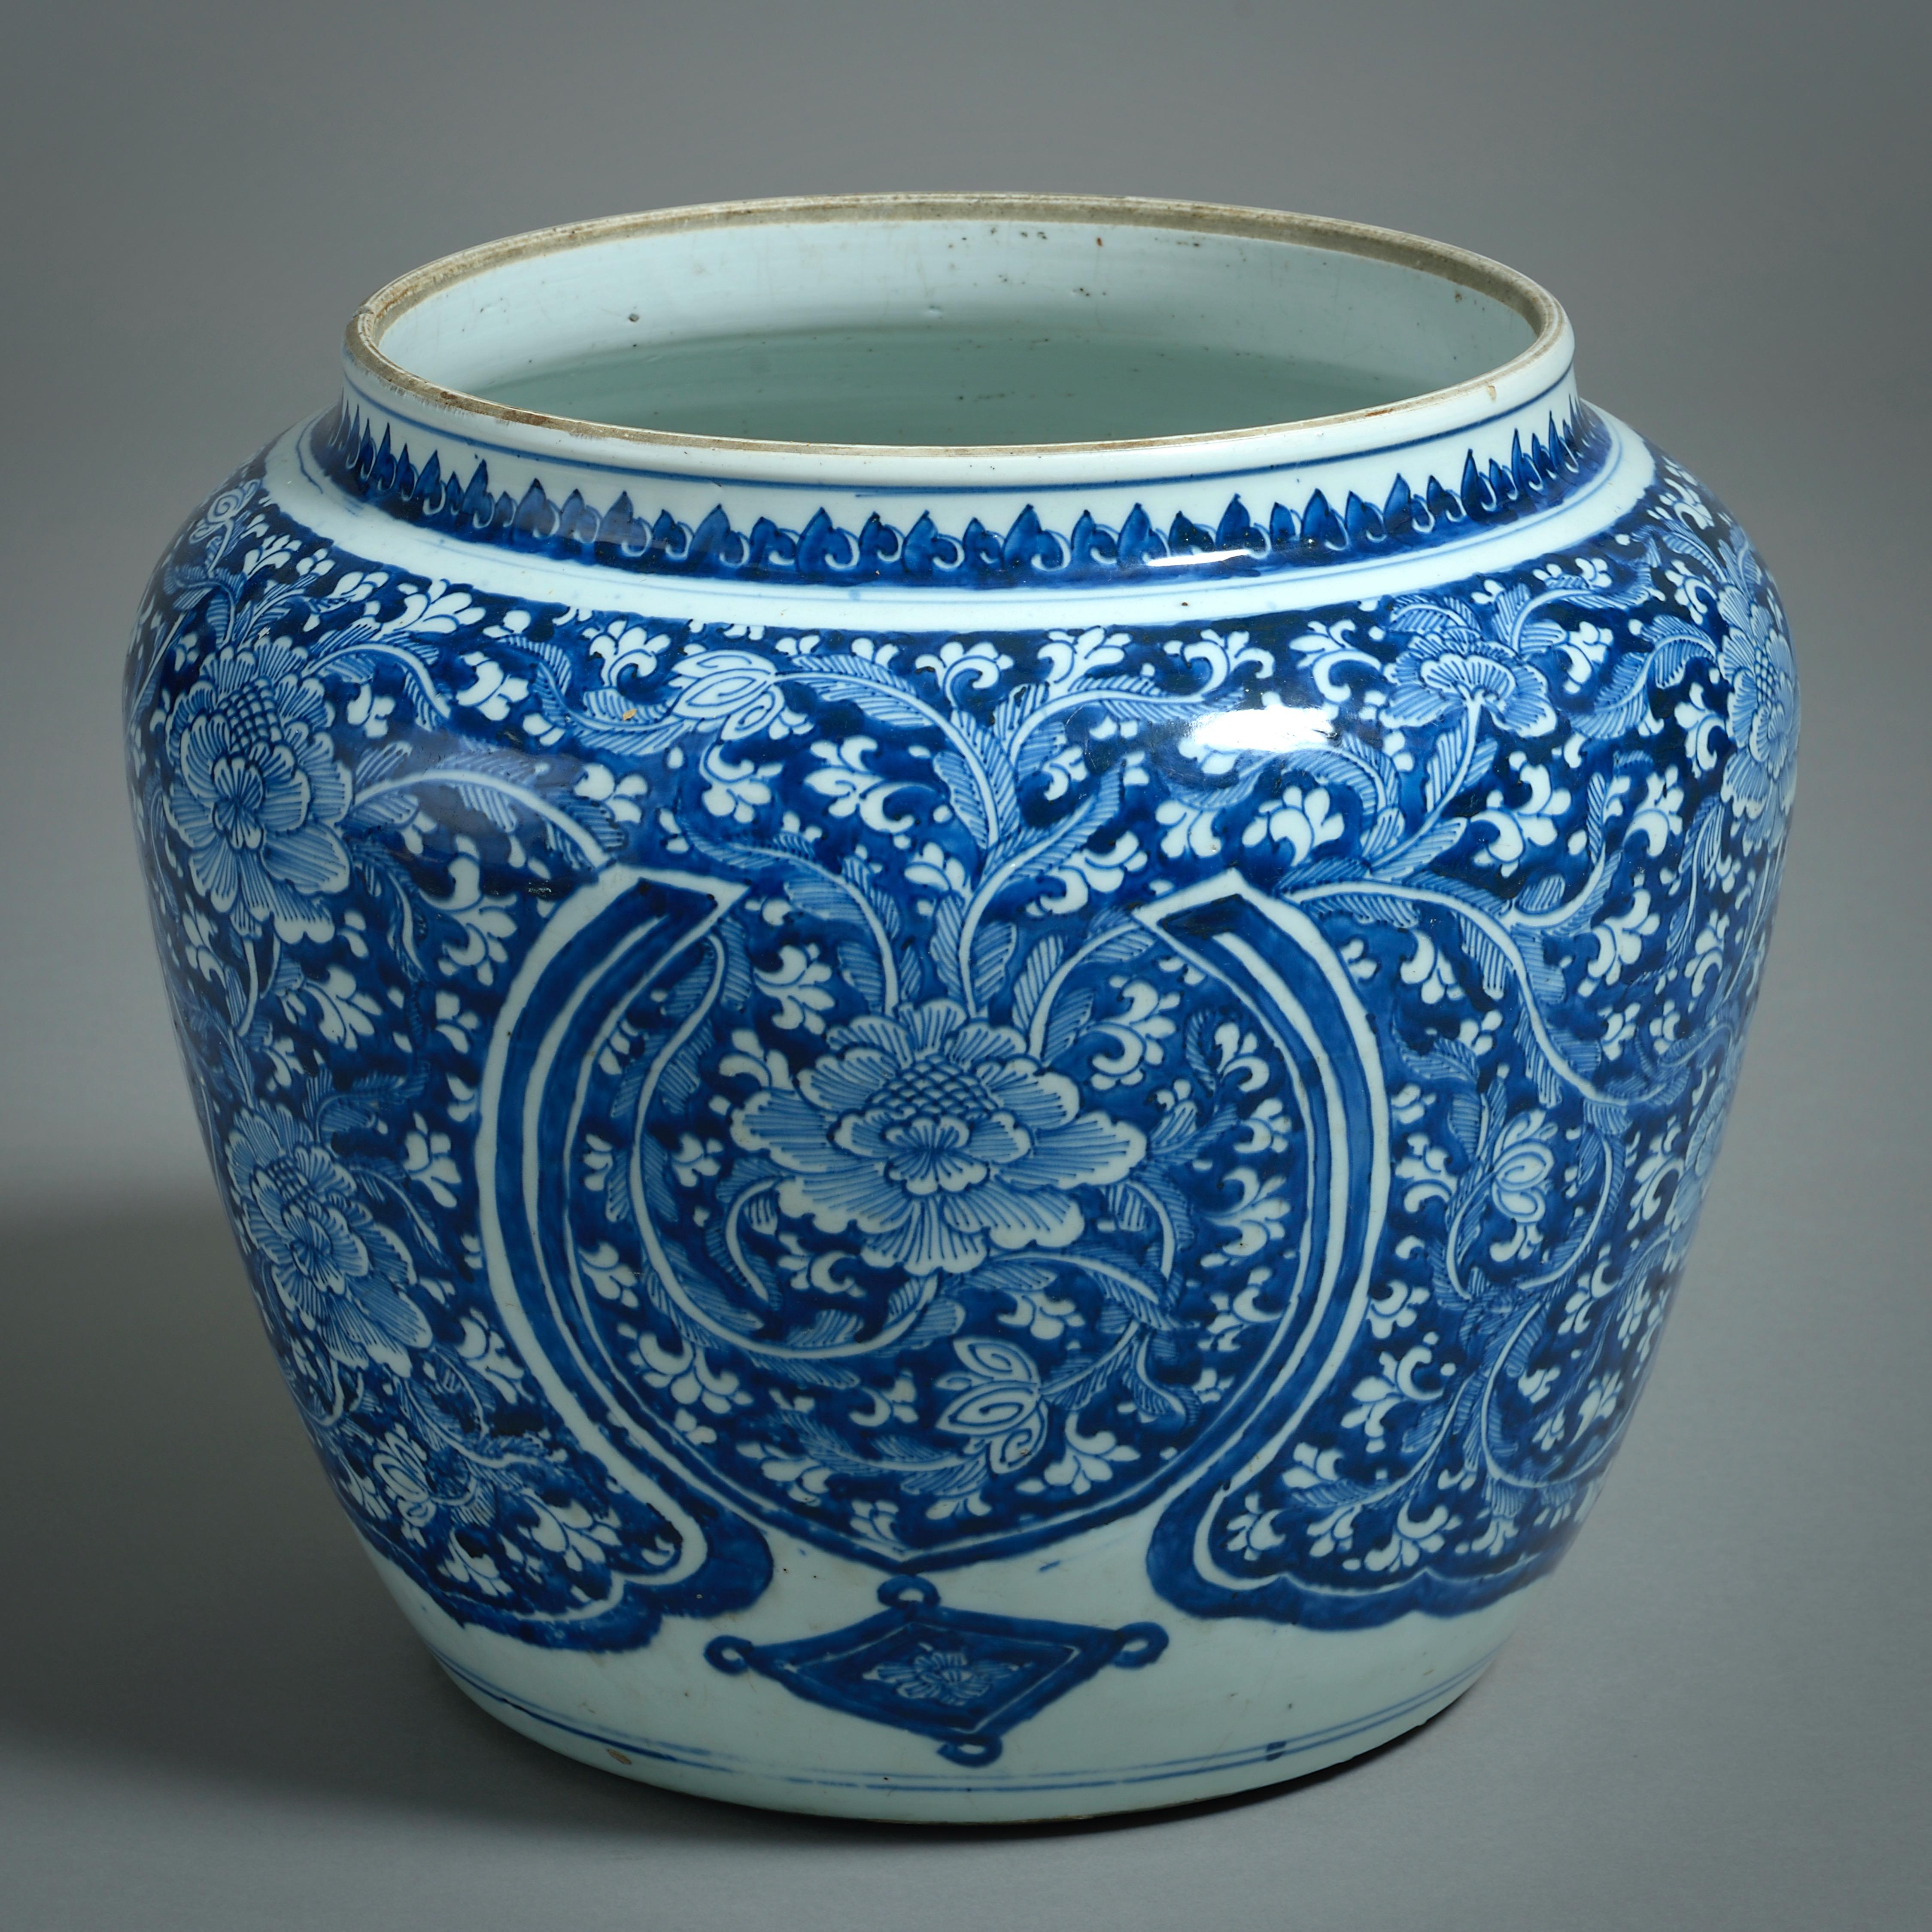 A large Kangxi blue-and-white jar decorated with peonies and scrolling foliage, second half of the 17th Century.